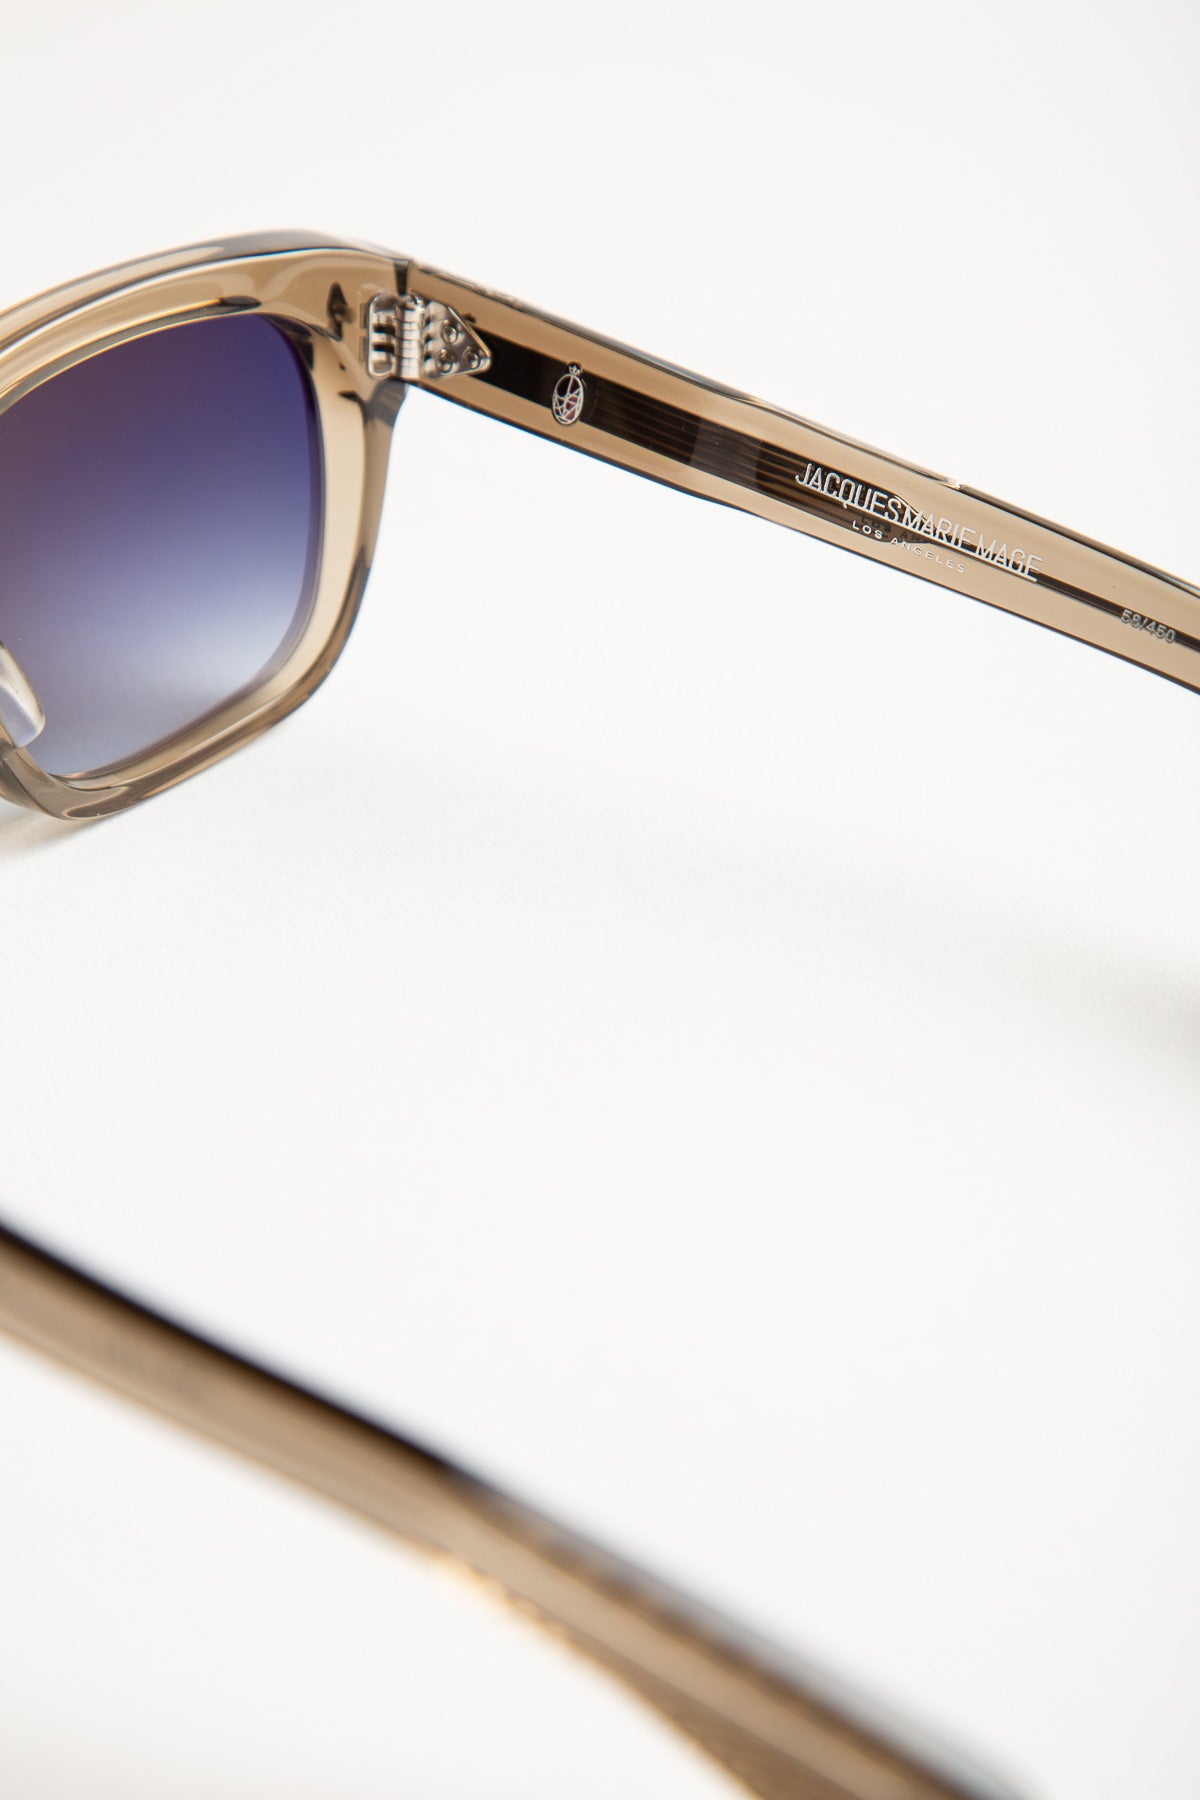 JACQUES MARIE MAGE | YVES SUNGLASSES